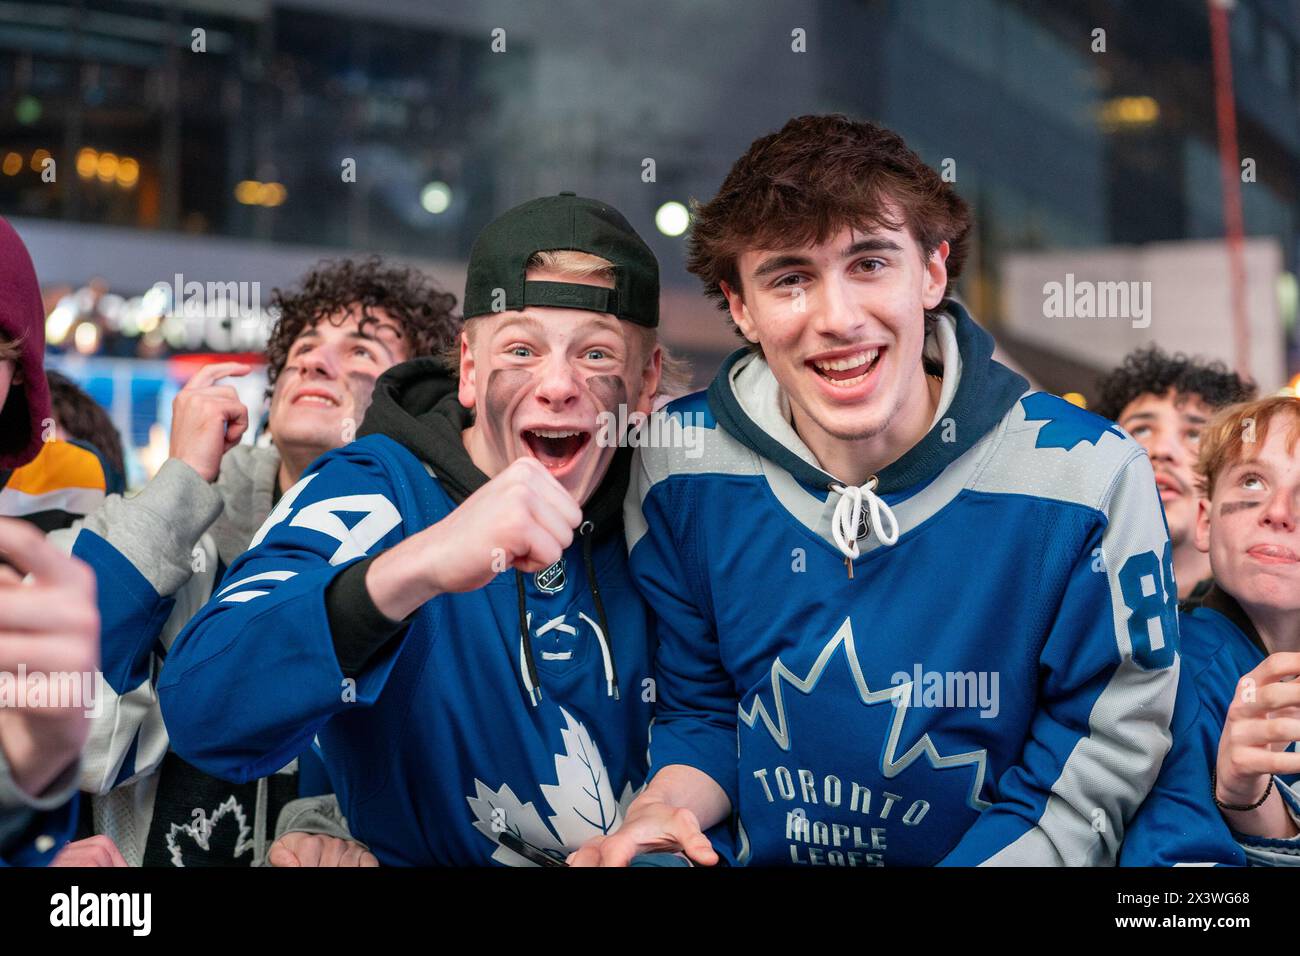 April 24, 2024, Toronto, Ontario, Canada: Fans watching the game on a giant screen react as the Toronto Maple Leafs score a goal against the Boston Bruins during Round 1, Game 4 at Maple Leaf Square outside Scotiabank Arena. During Toronto Maple Leafs playoff games, Maple Leaf Square transforms into a sea of blue and white, echoing with the chants of passionate fans eagerly rallying behind their team's quest for victory. The electric atmosphere radiates anticipation and excitement, creating unforgettable memories for both die-hard supporters and casual observers alike. (Credit Image: © Shawn G Stock Photo